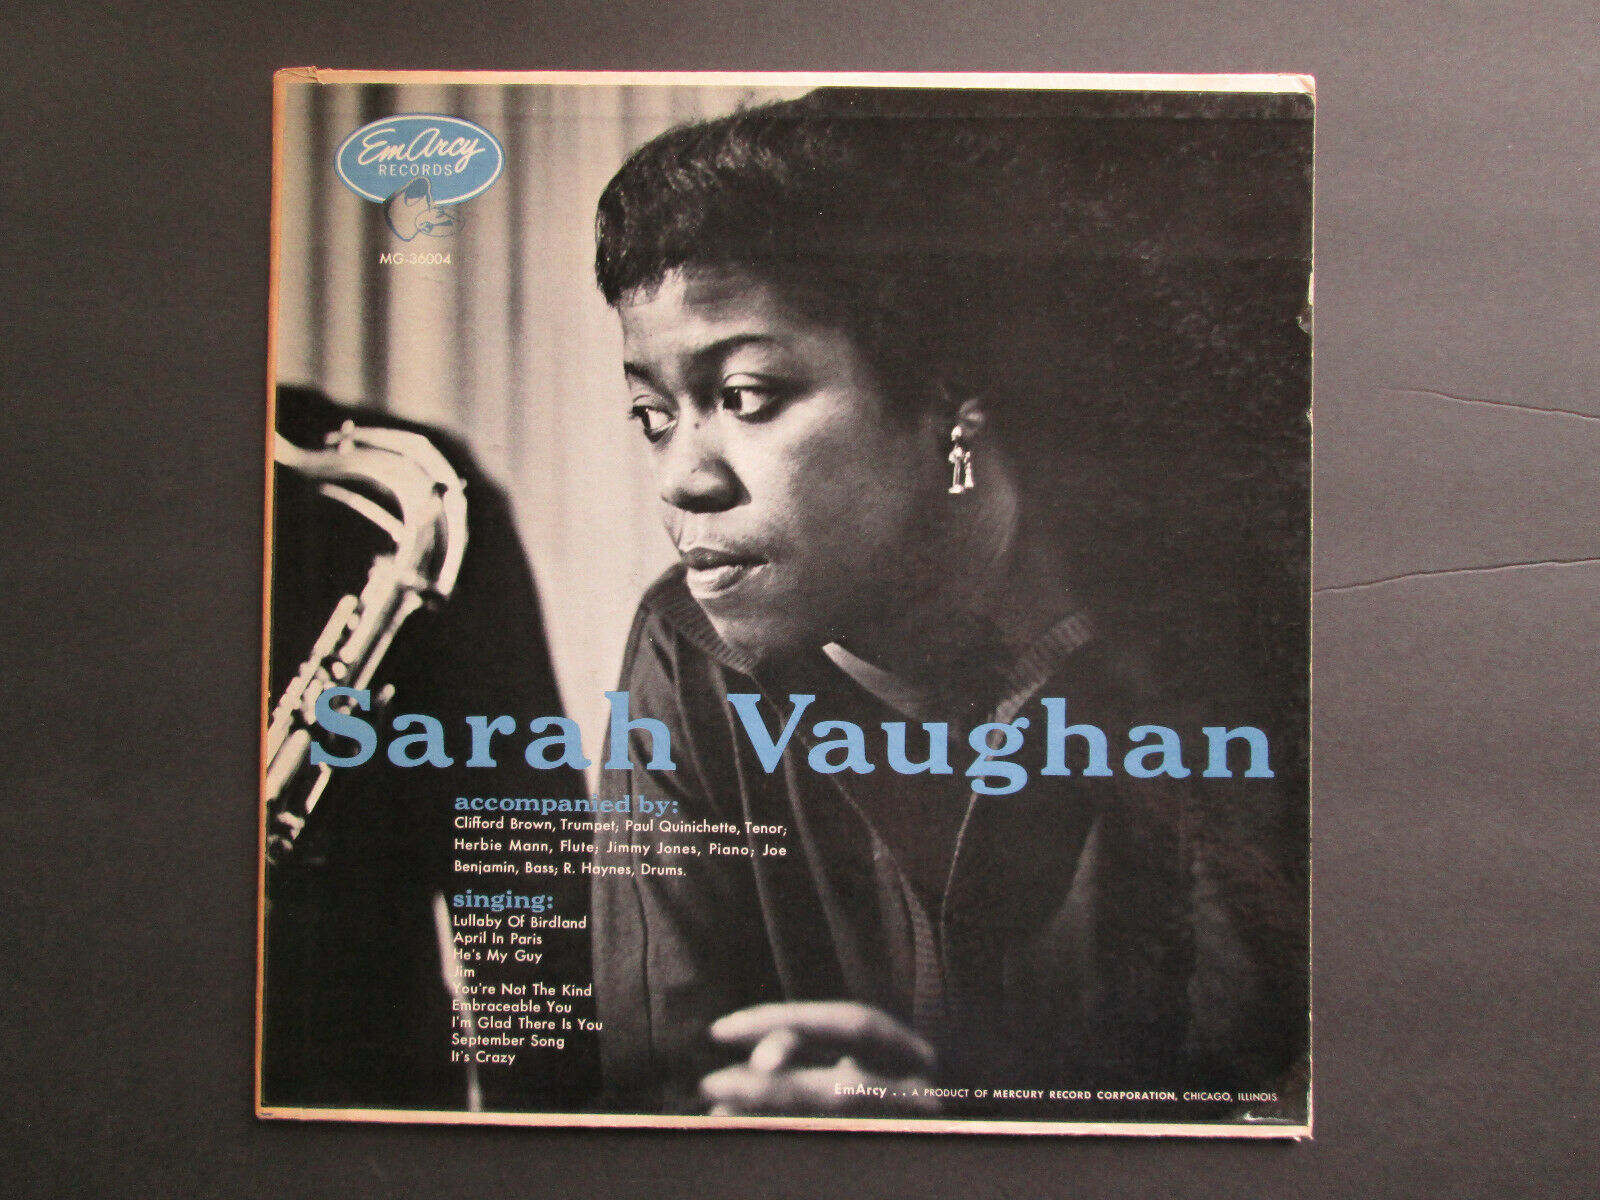 popsike.com - Sarah Vaughan - EmArcy Records - Blue Text - MG 36004 -  auction details